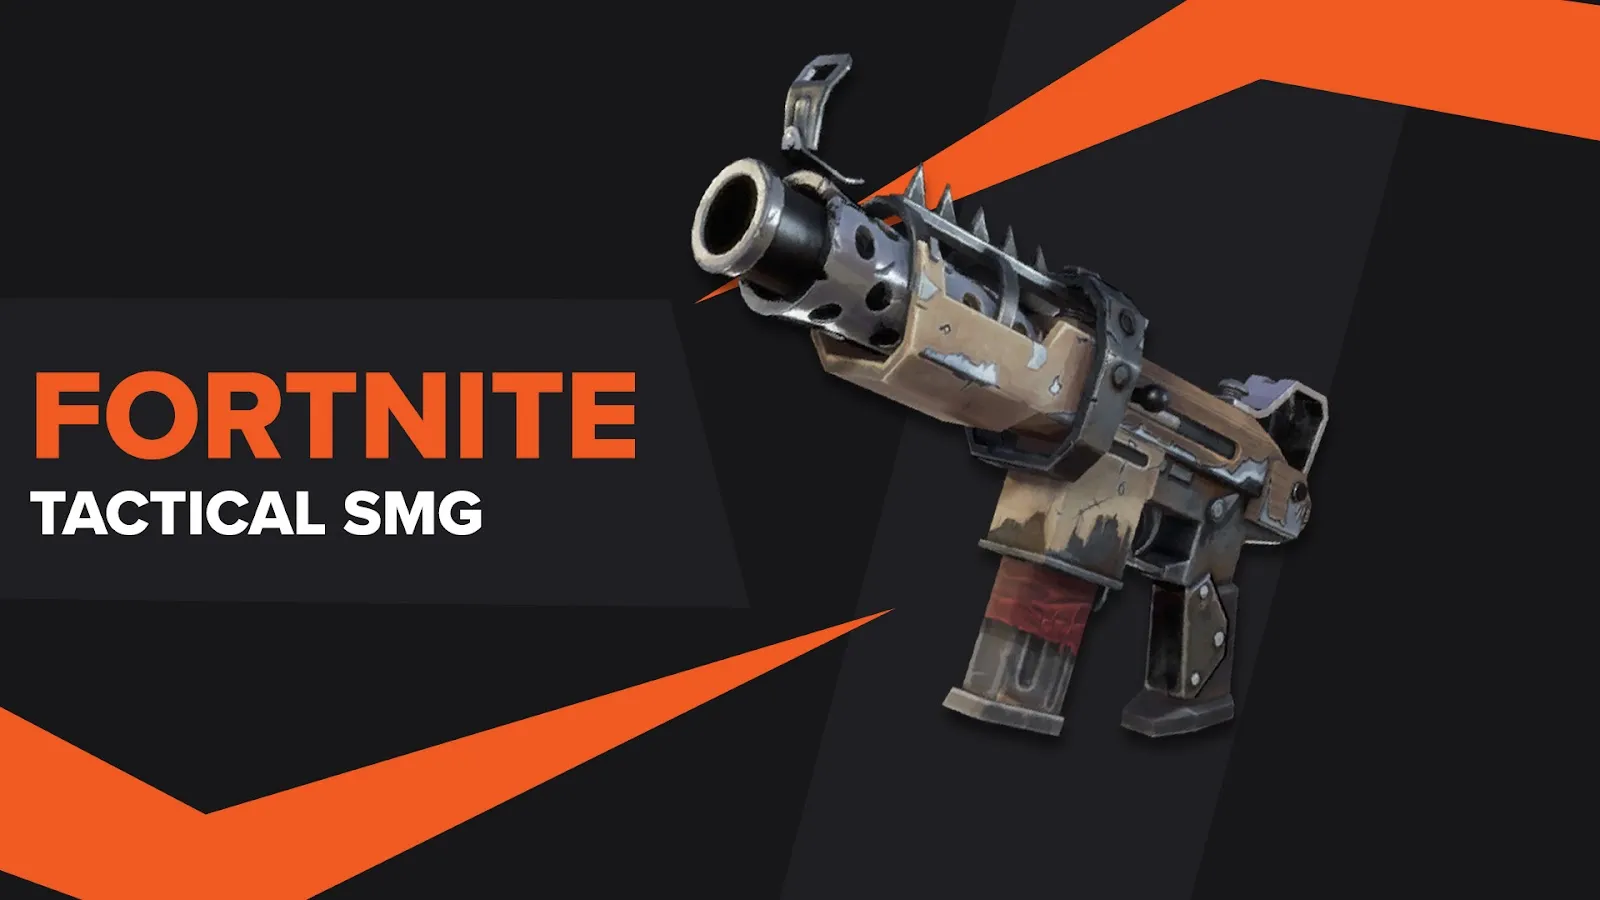 Tactical SMG Fortnite Weapon